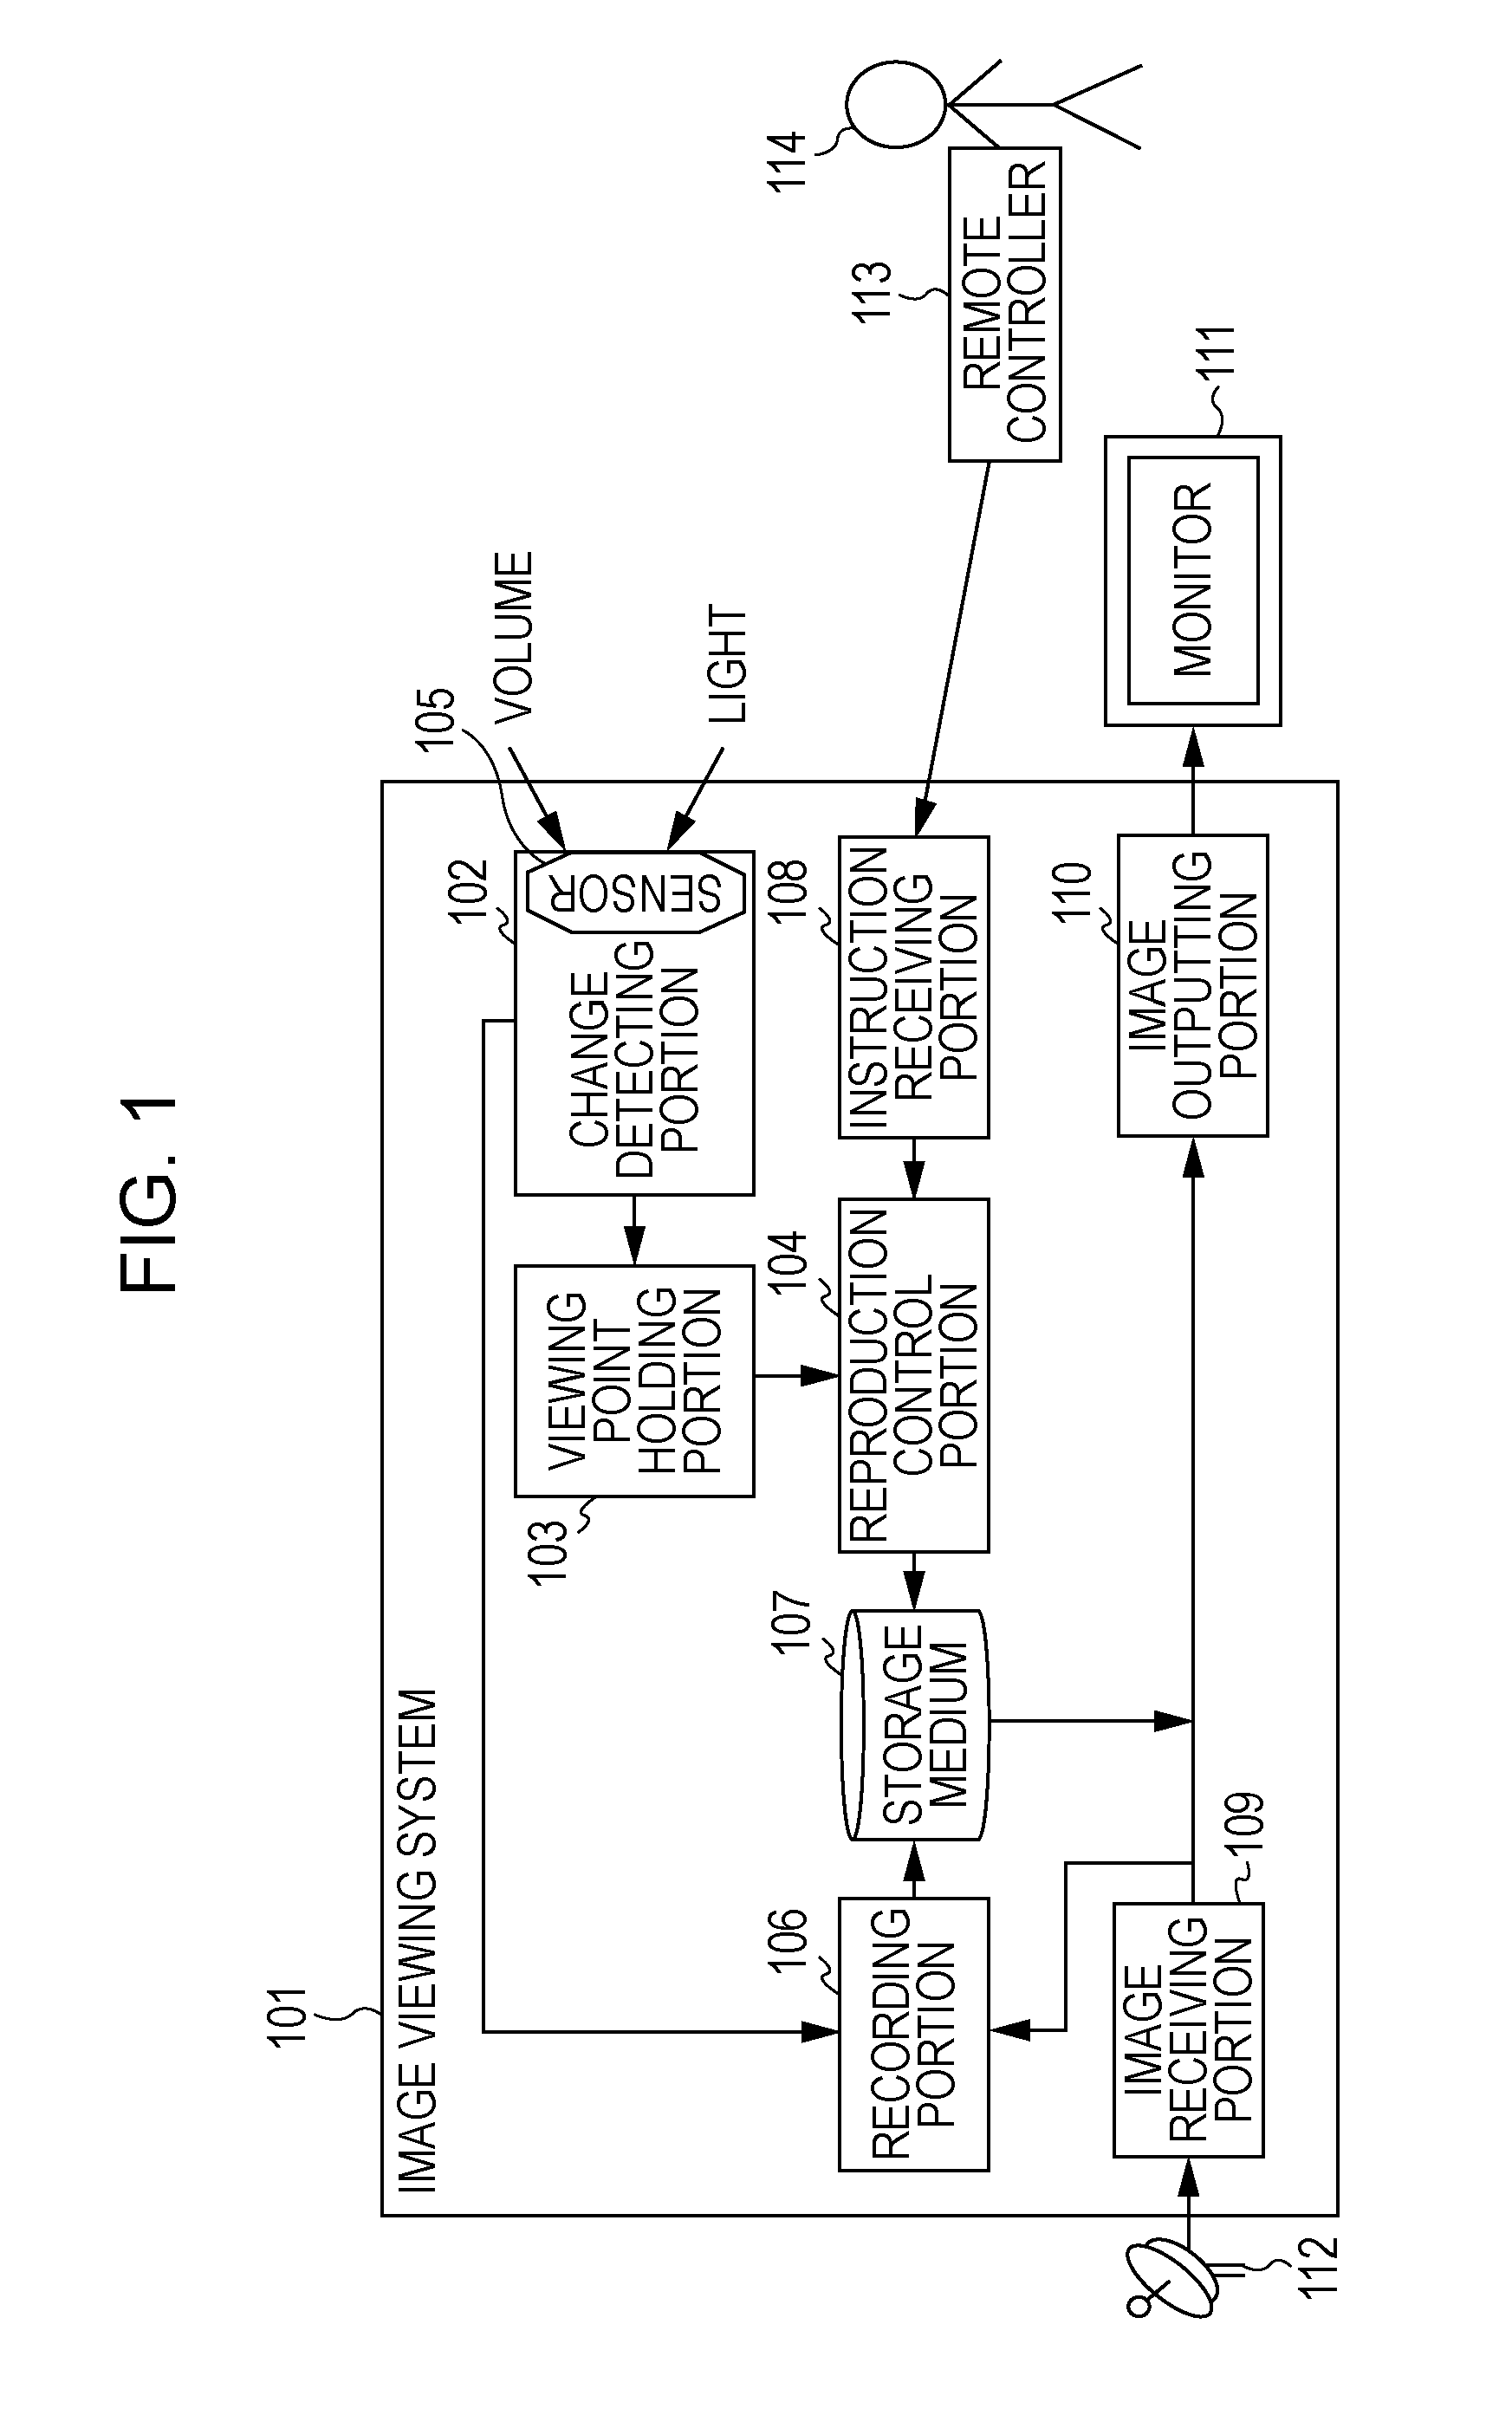 Reproducing apparatus and control method thereof